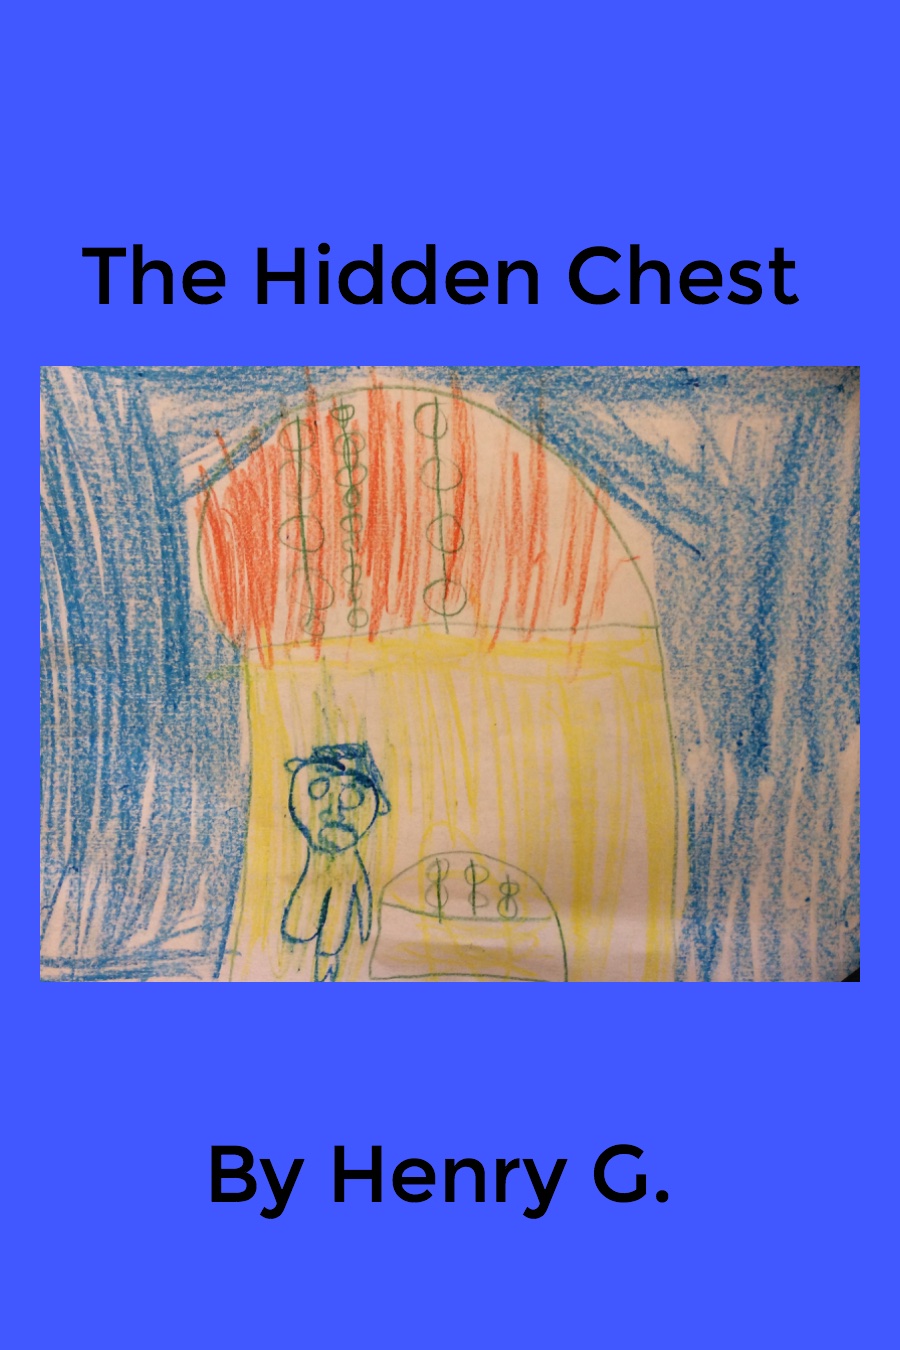 The hidden chest by Henry G